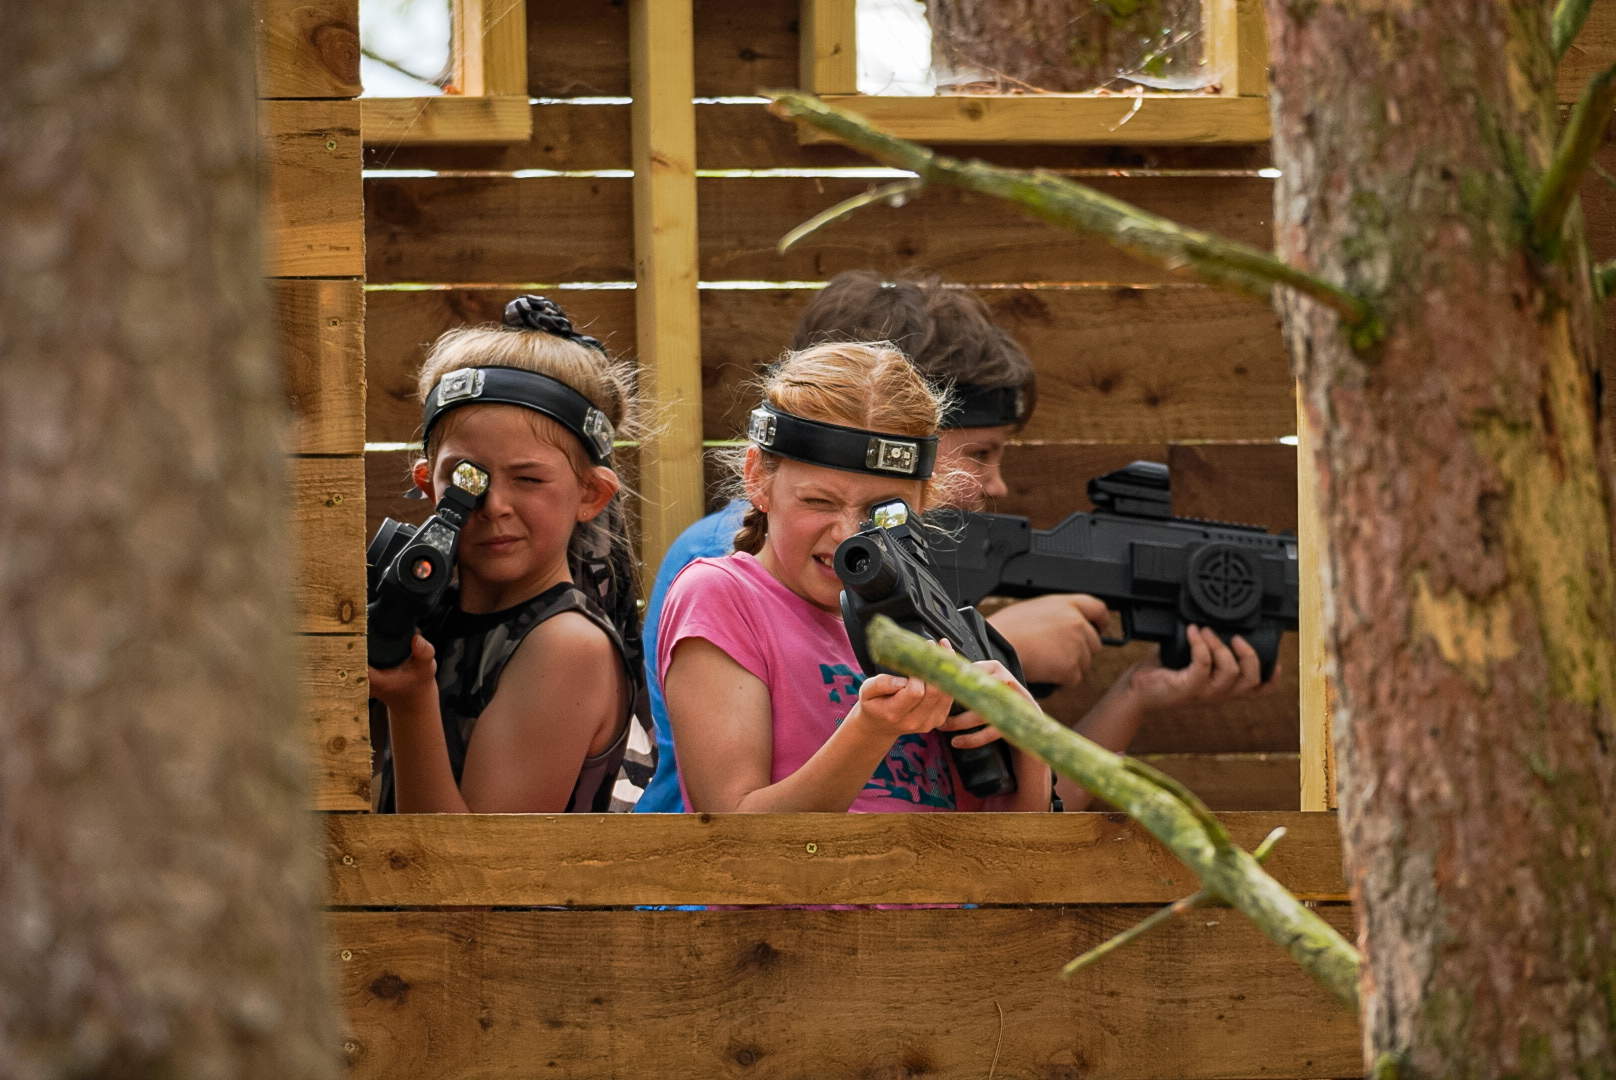 5 Reasons Why Outdoor Laser Tag Builds Stronger Bonds Among Friends with Rumble Live Action Gaming